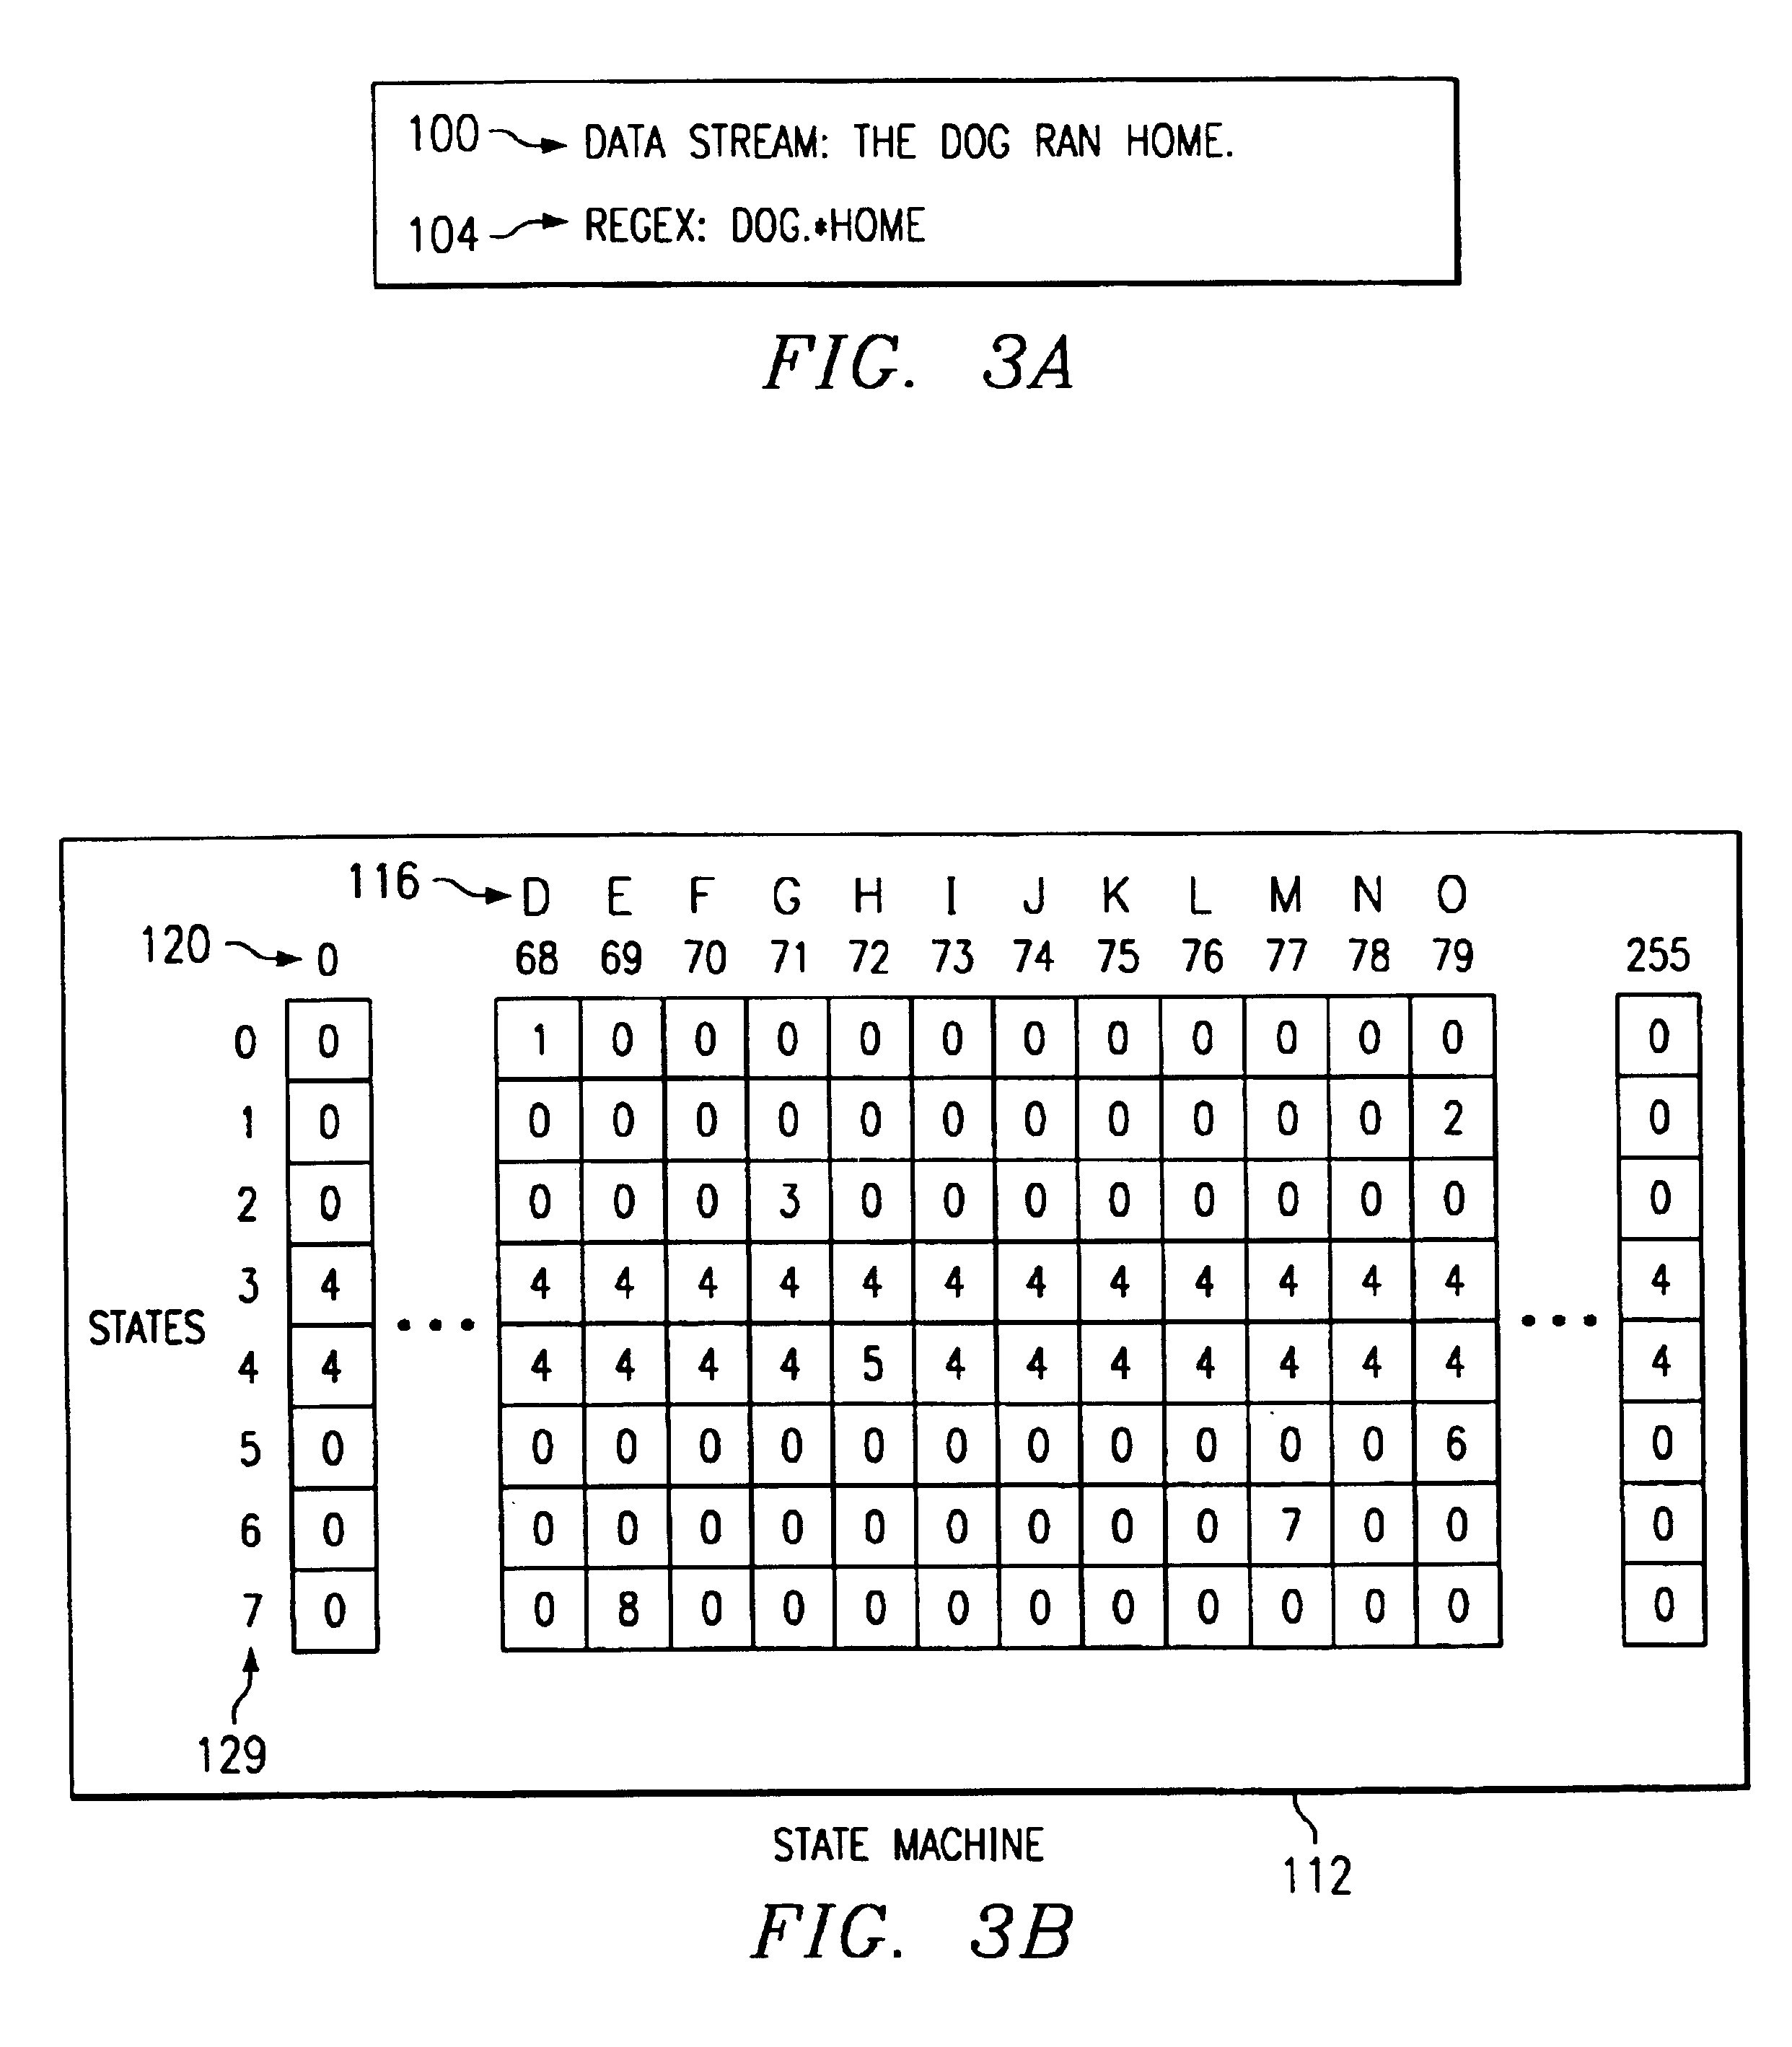 Binary state machine system and method for REGEX processing of a data stream in an intrusion detection system